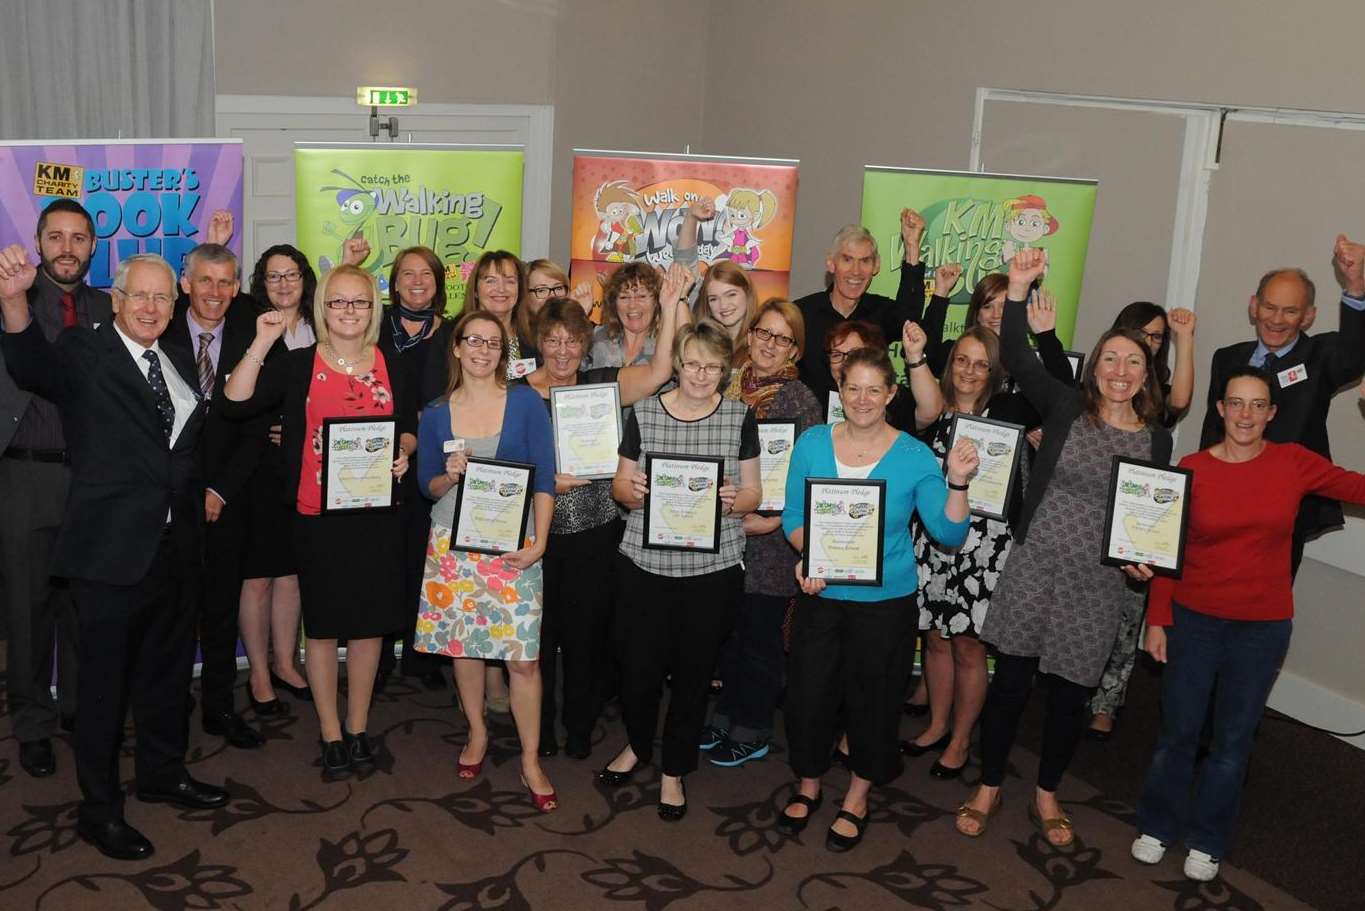 Kent Schools committed to green travel schemes for three academic years are rewarded with Platinum Pledge certificates from KM Walk to School sponsors during a presentation held at the Mercure Great Danes Hotel, Maidstone